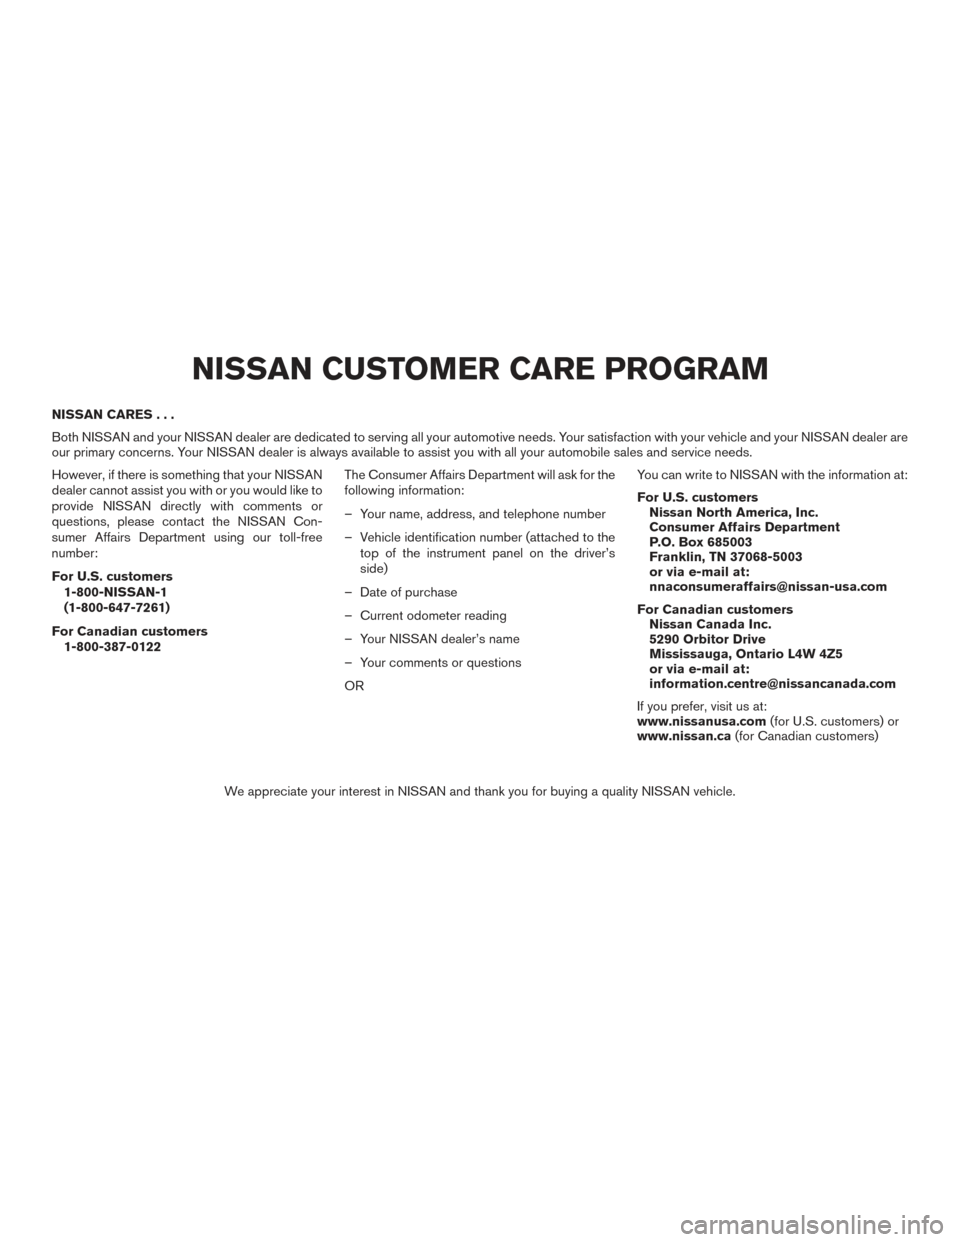 NISSAN TITAN 2016 2.G Owners Manual NISSAN CARES...
Both NISSAN and your NISSAN dealer are dedicated to serving all your automotive needs. Your satisfaction with your vehicle and your NISSAN dealer are
our primary concerns. Your NISSAN 